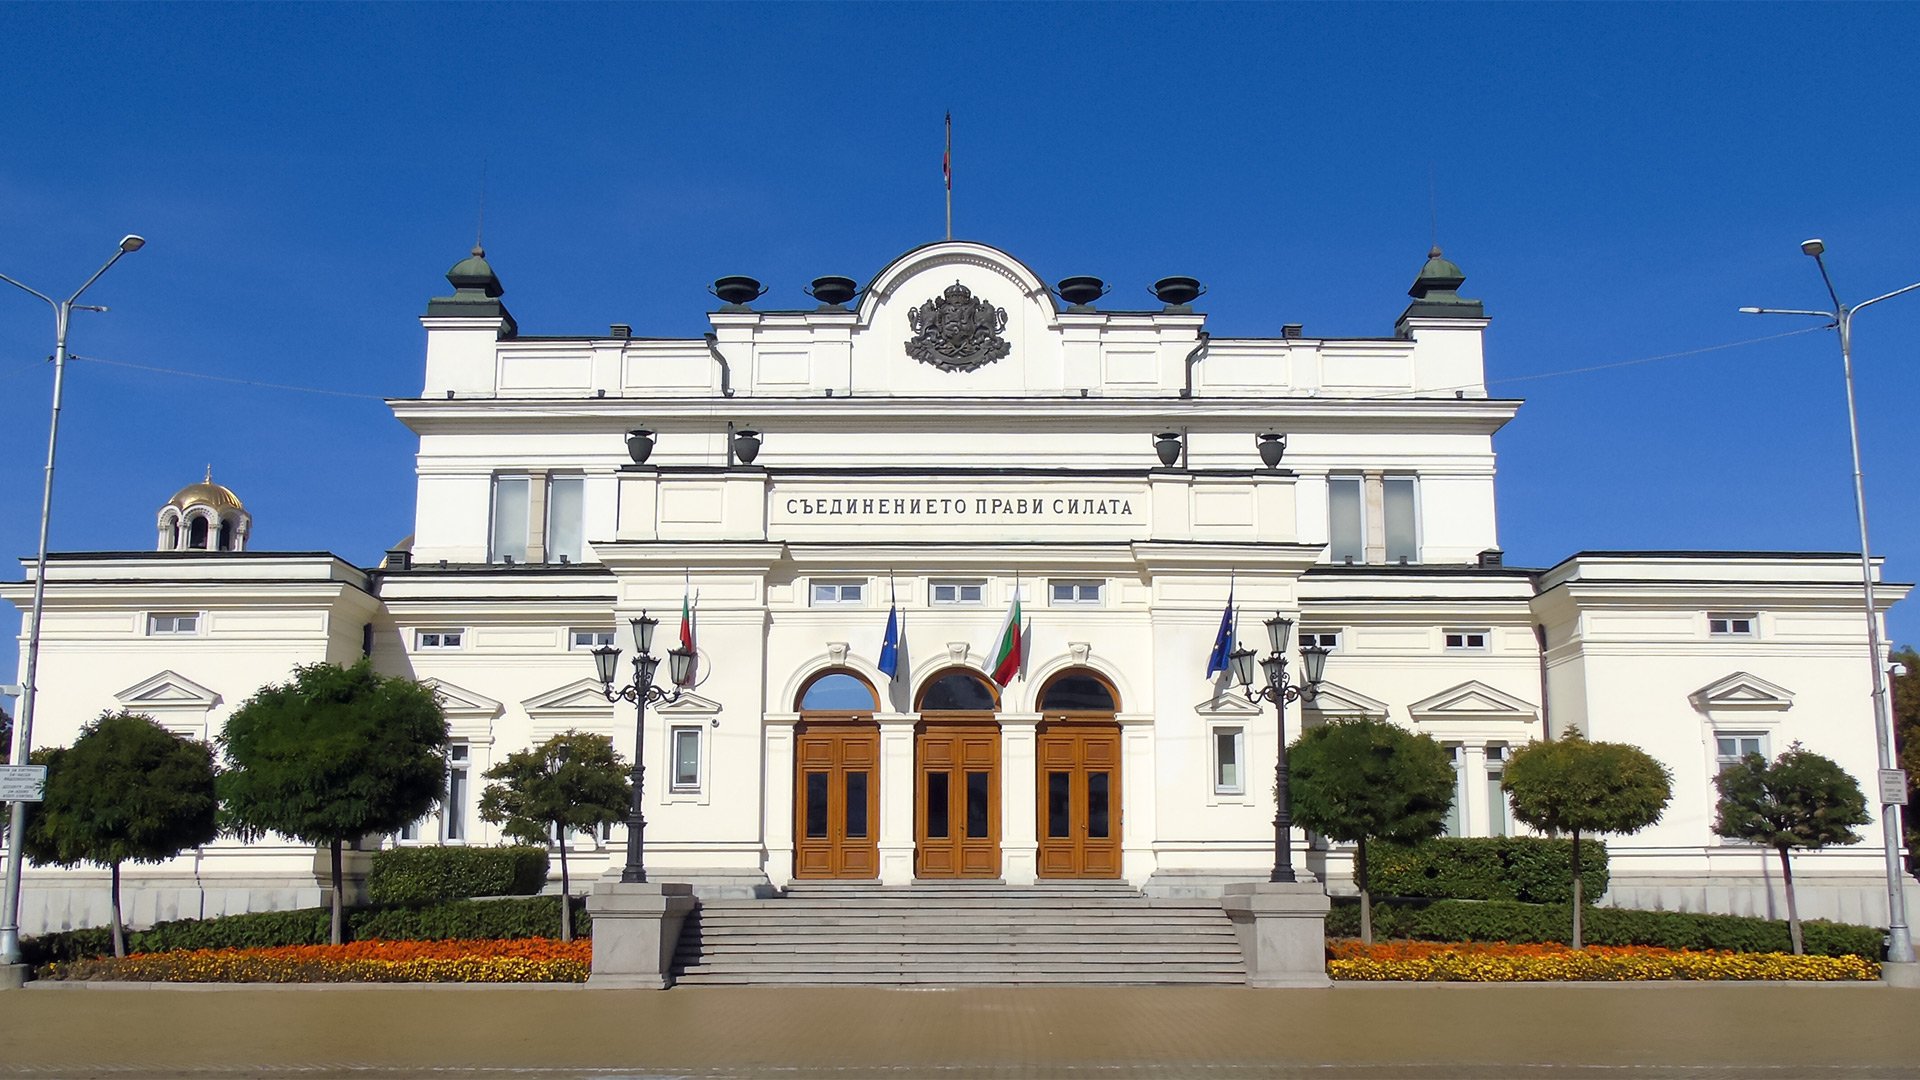 Bulgaria: Parliament restrics gambling ads across all media, forbids casinos in town with less than 10,000 inhabitants